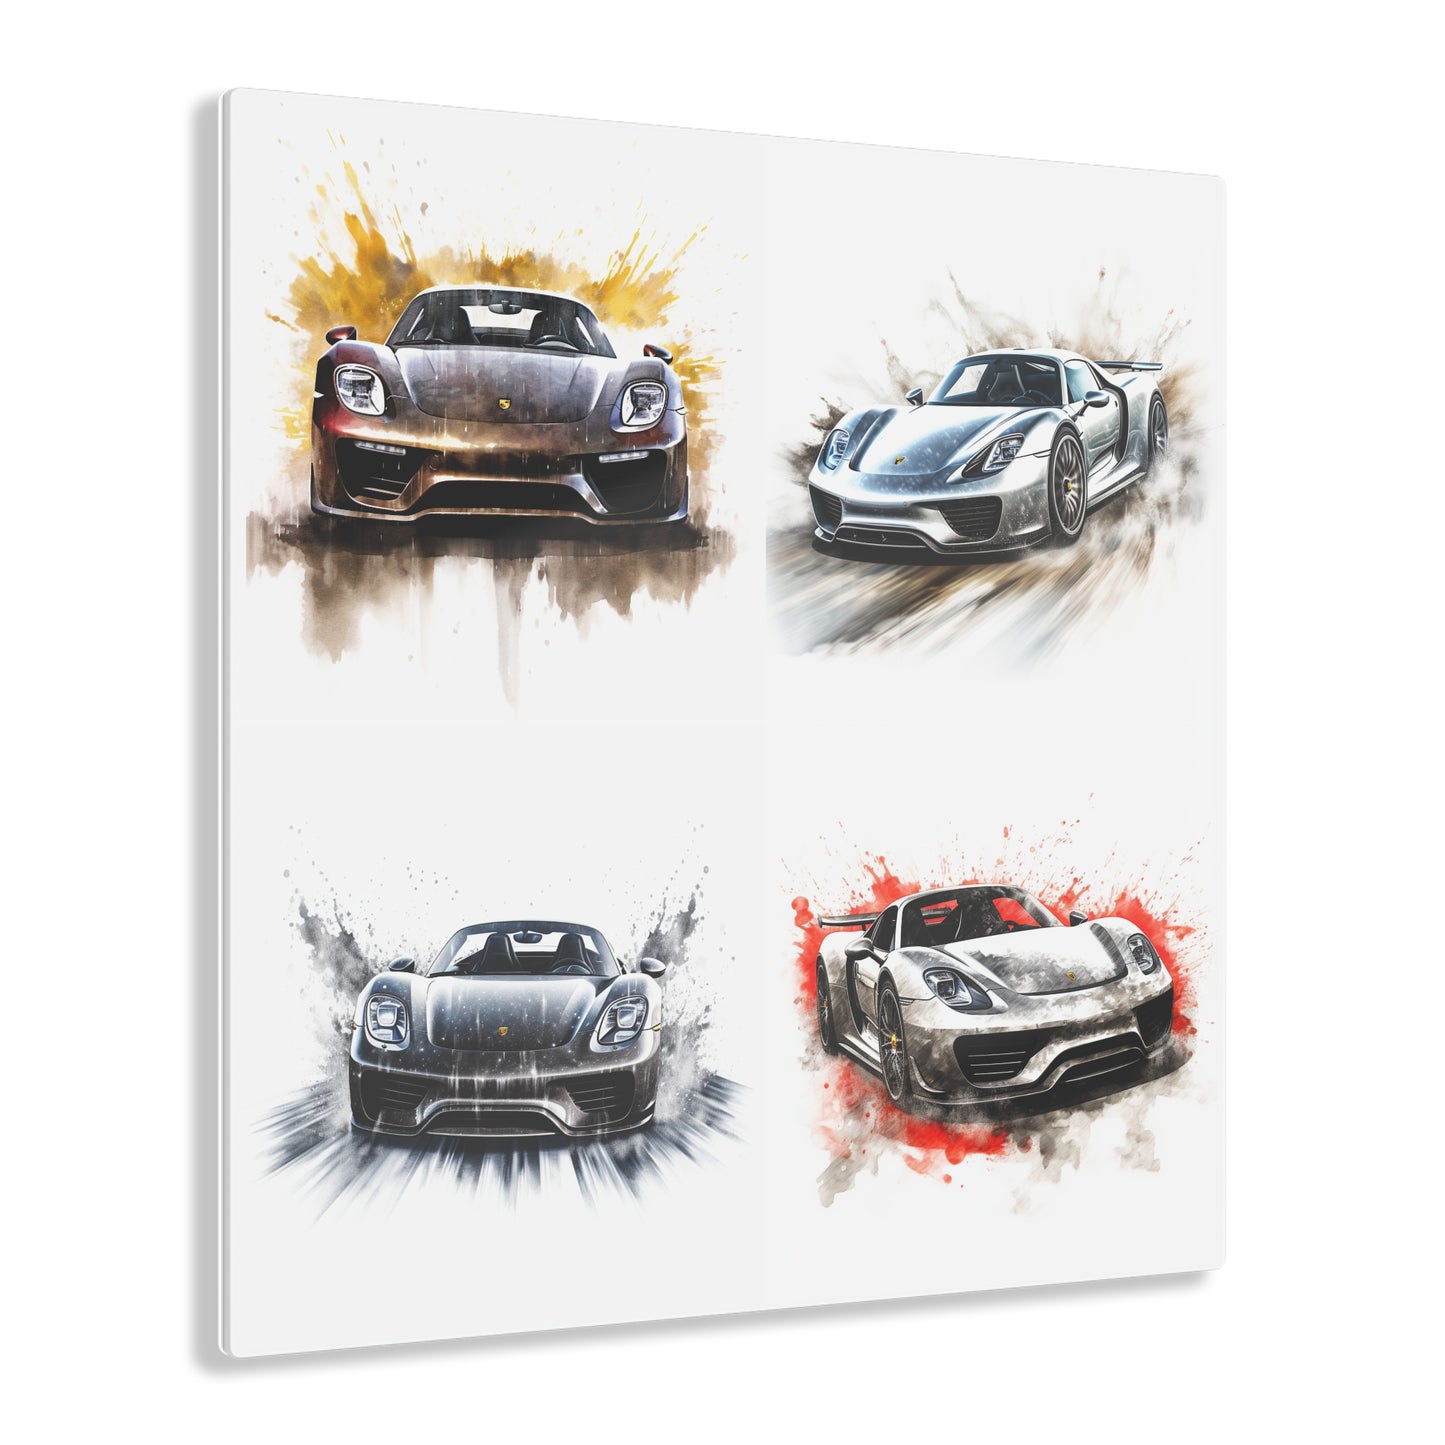 Acrylic Prints 918 Spyder white background driving fast with water splashing 5